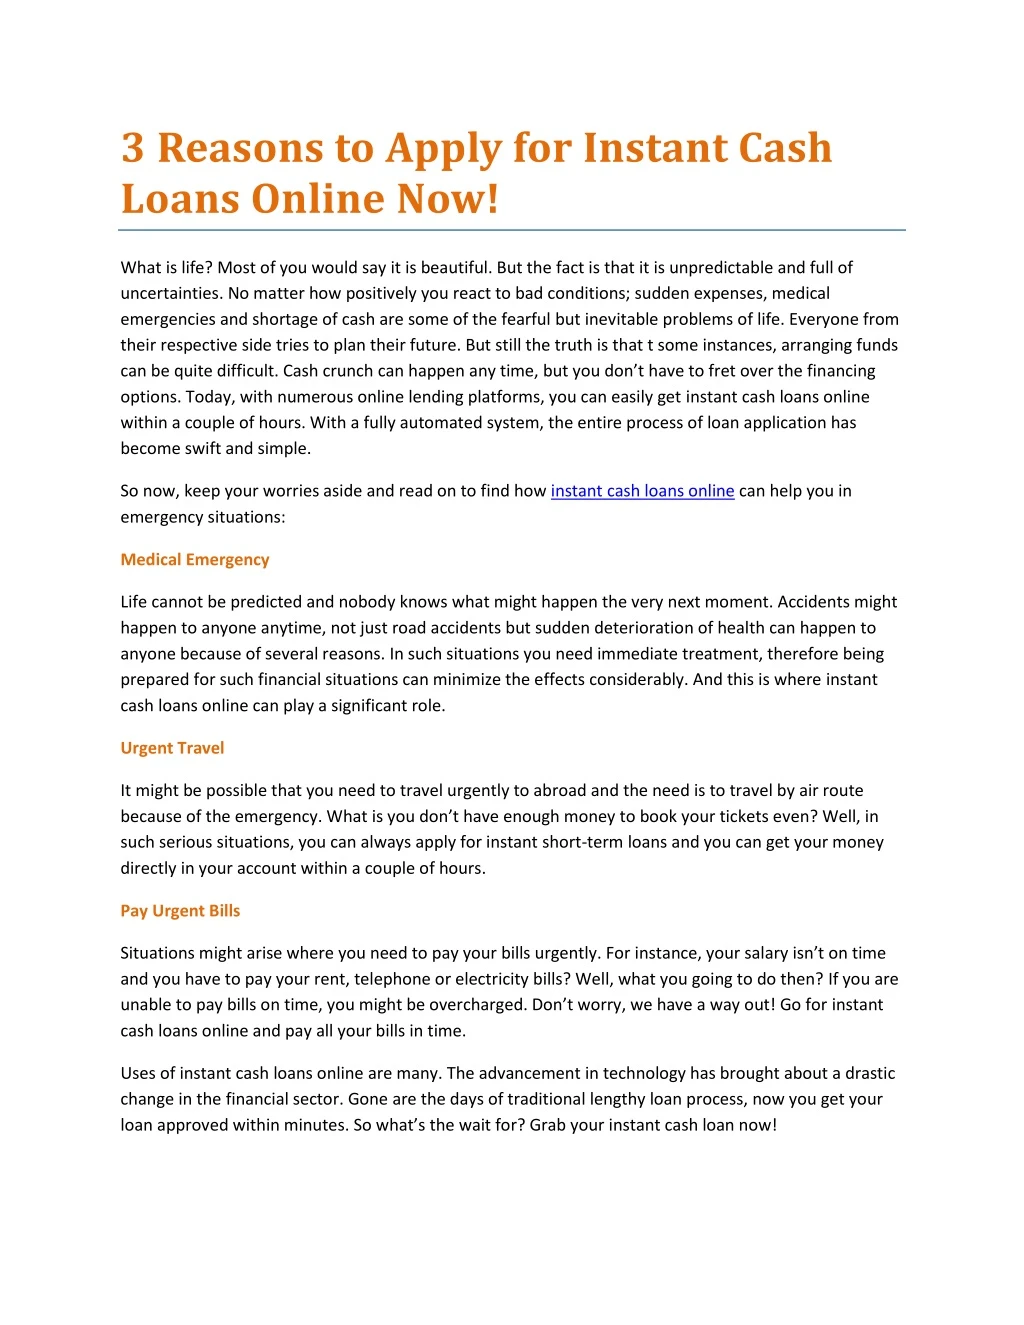 3 reasons to apply for instant cash loans online